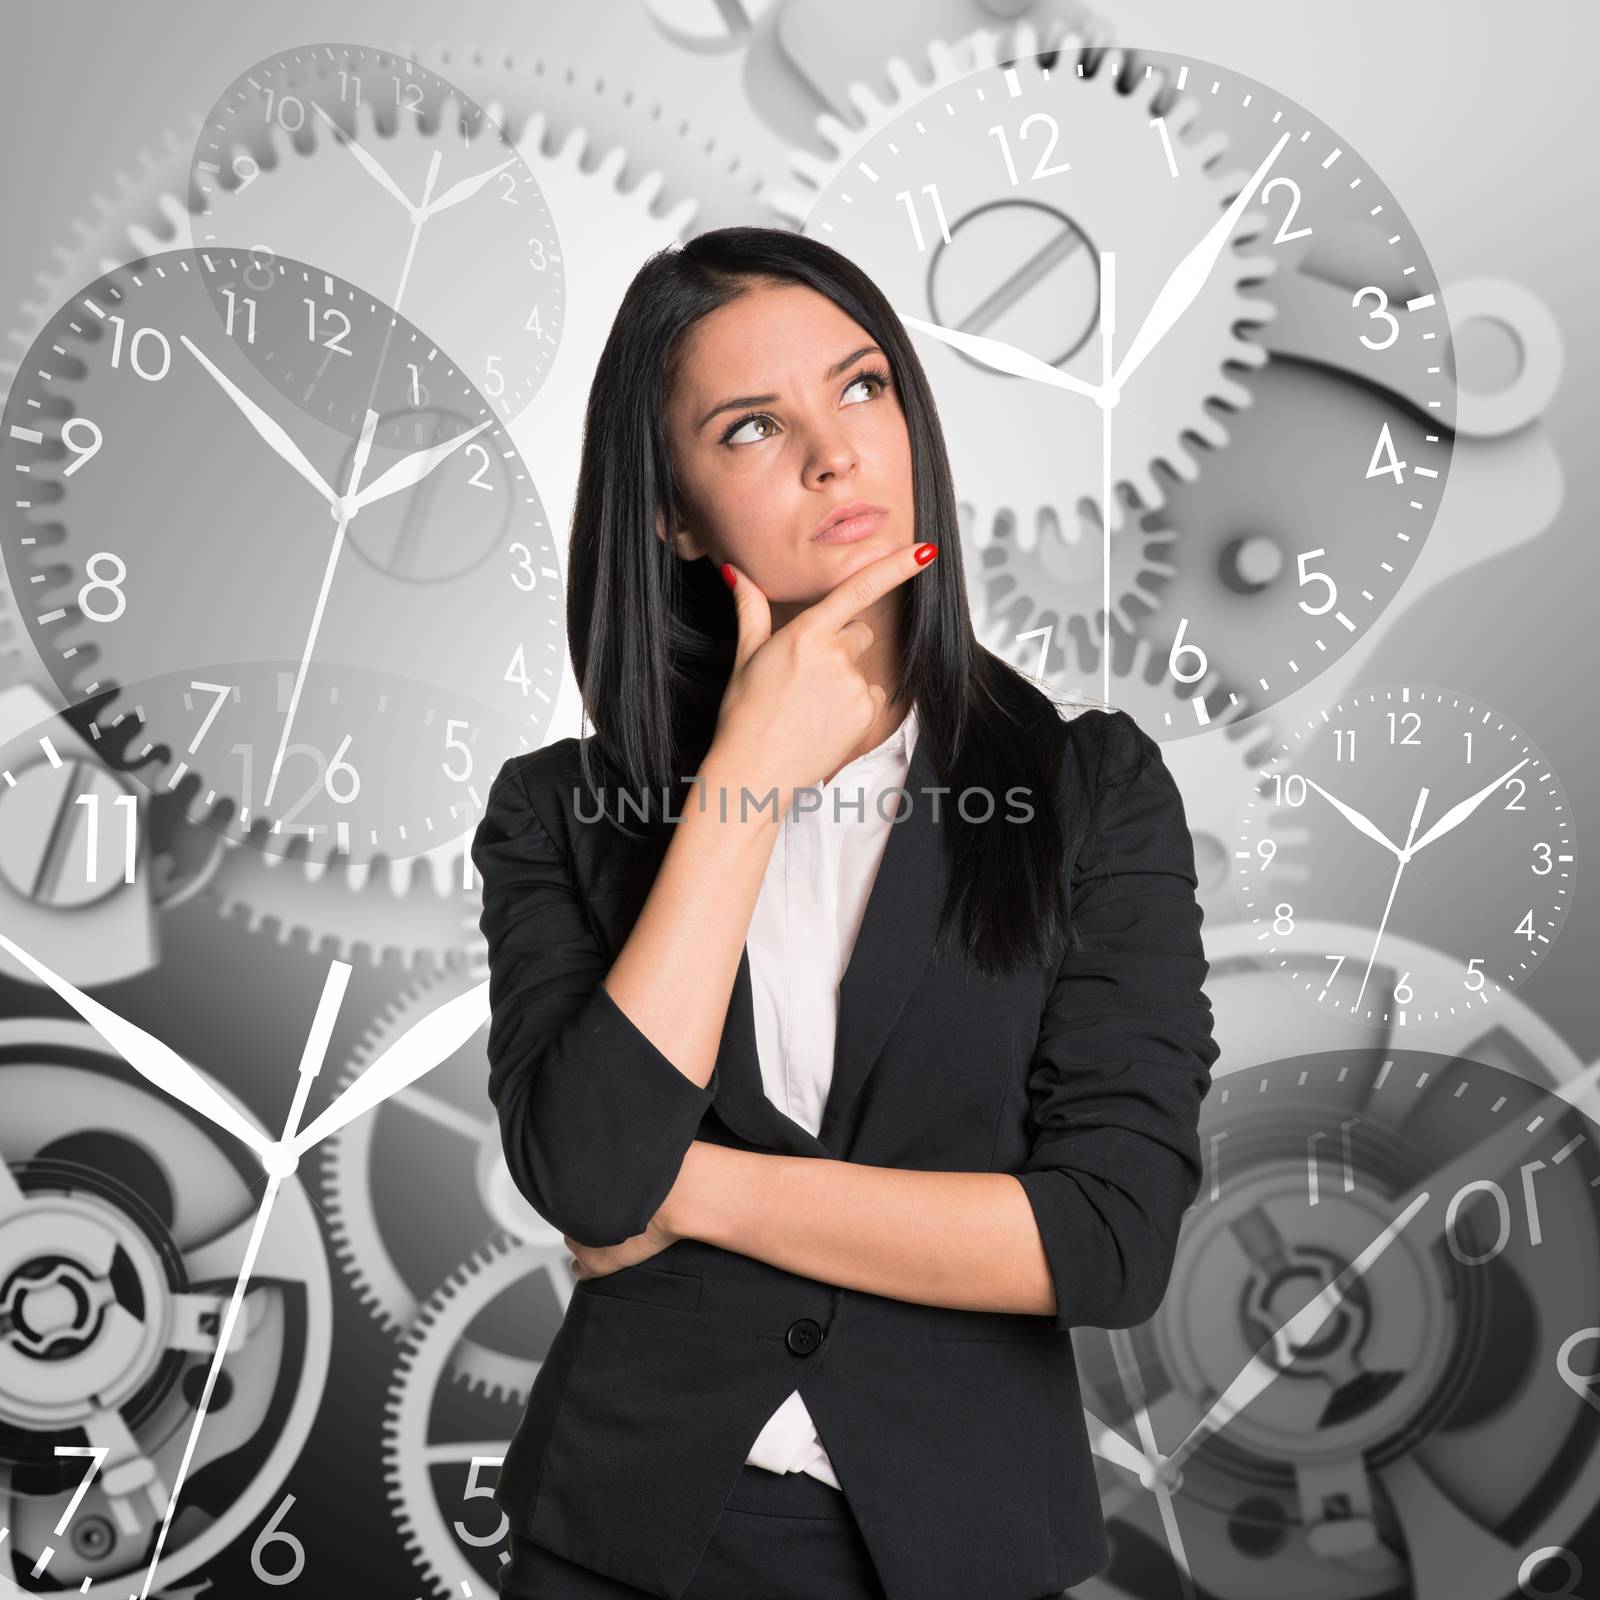 Thinking businesswoman on abstract background with clocks